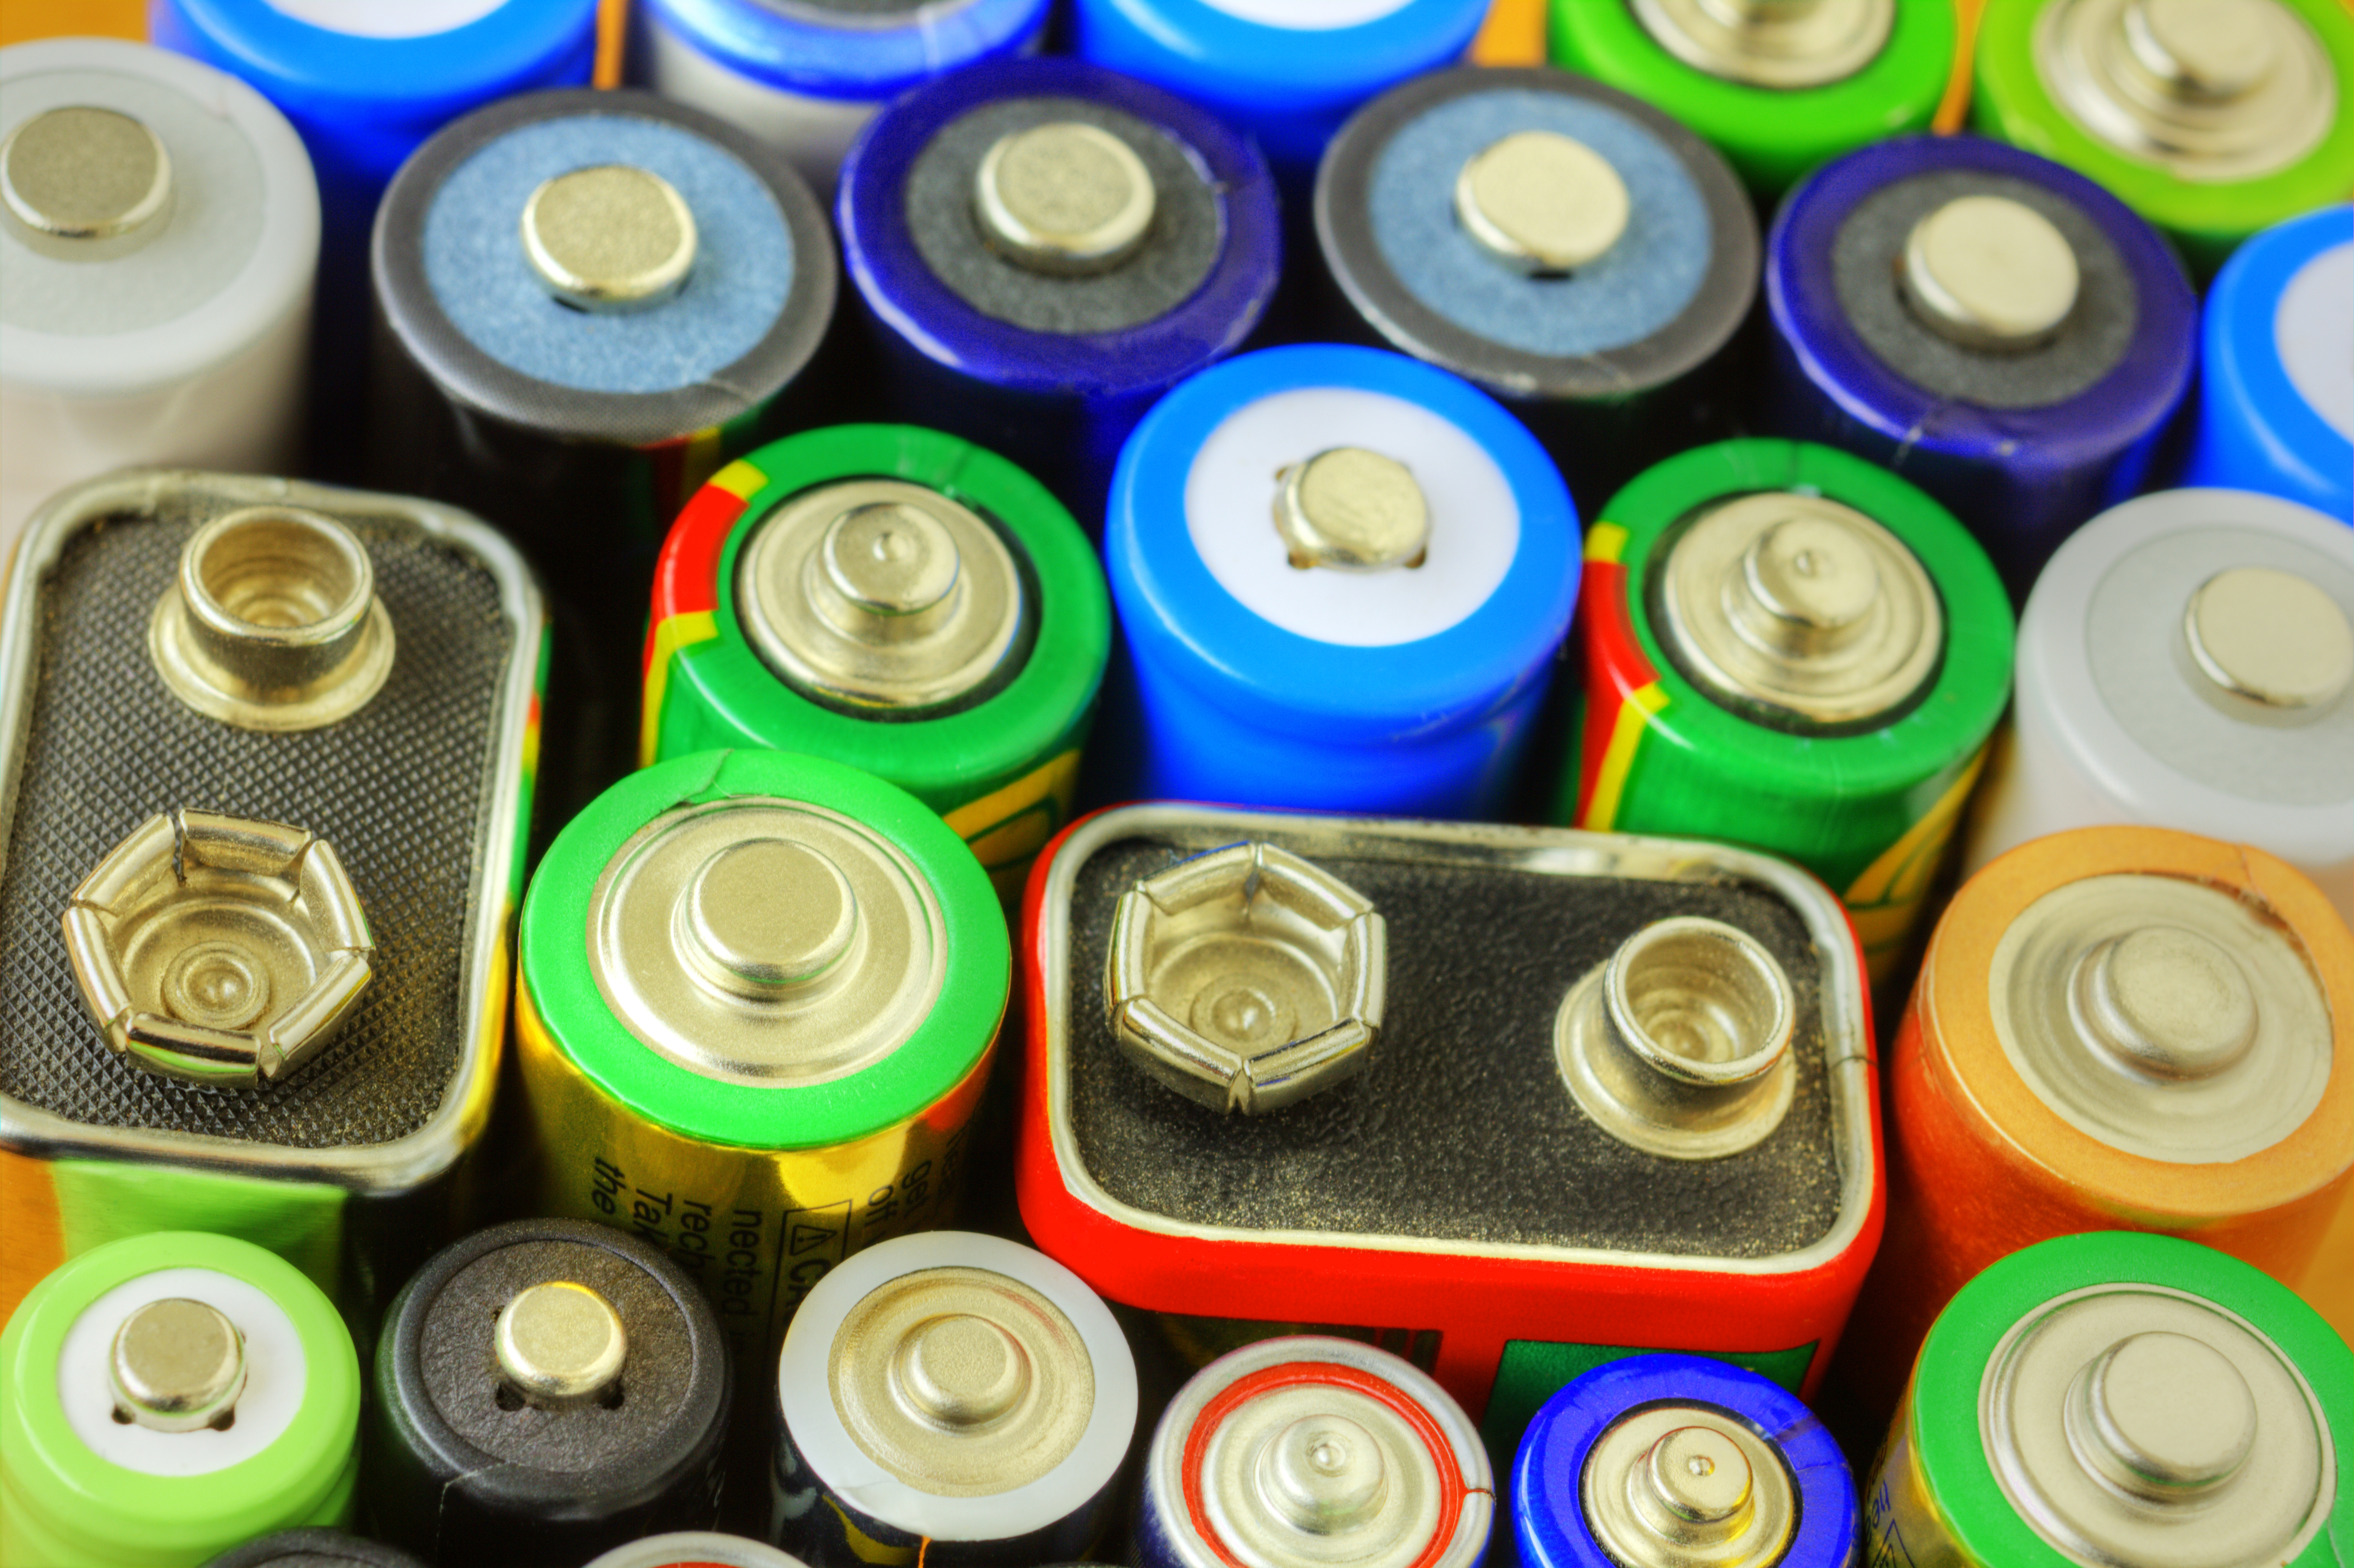 A collection of many different types of batteries.